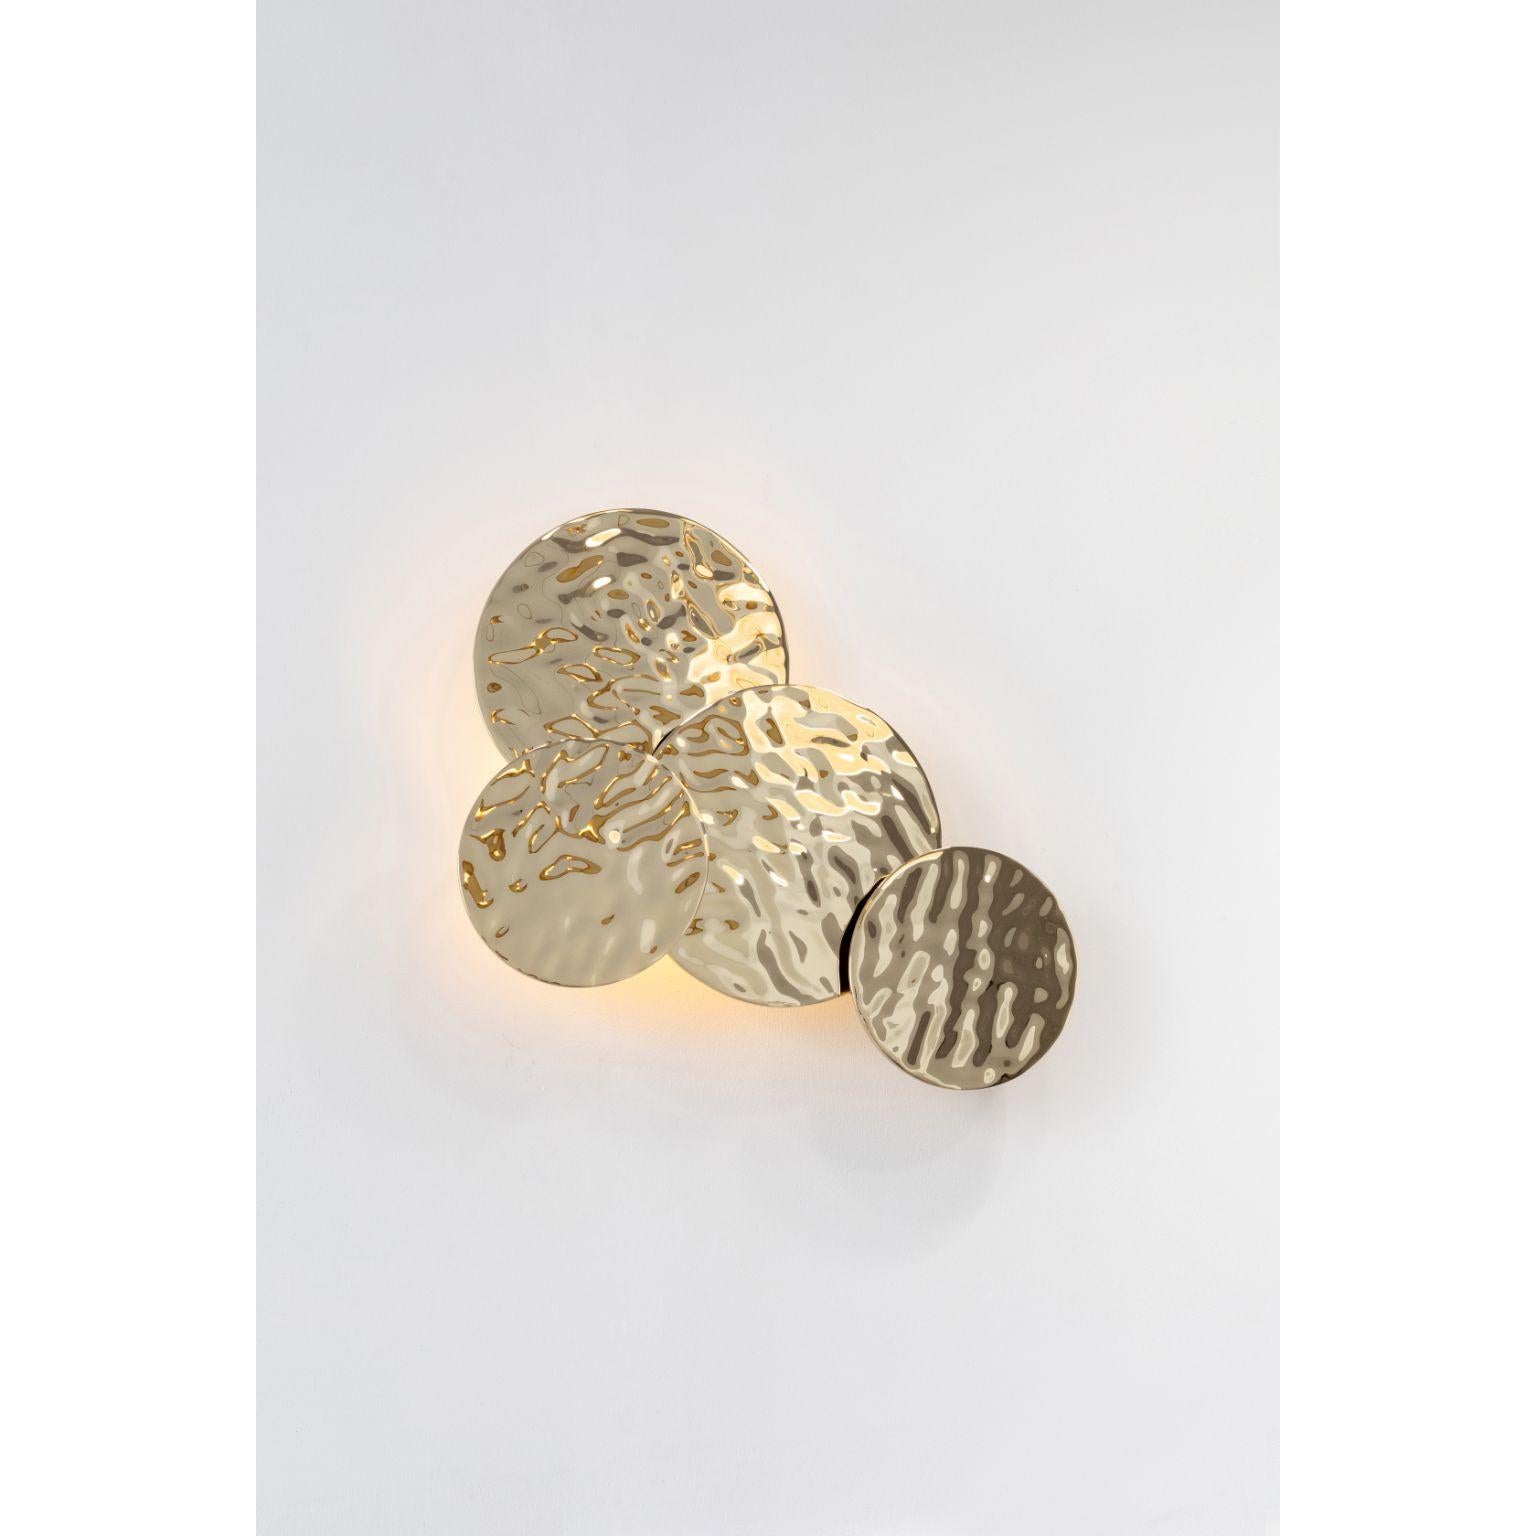 Liquide wall lamp by Mydriaz
Dimensions: W 38.2 x H 38.6 x D 7.2 cm
Materials: Brass
Finishes: Golden-plated polished brass
 White nickel finish on polished brass
 Black nickel finish on polished brass
6 kg

All our lamps can be wired